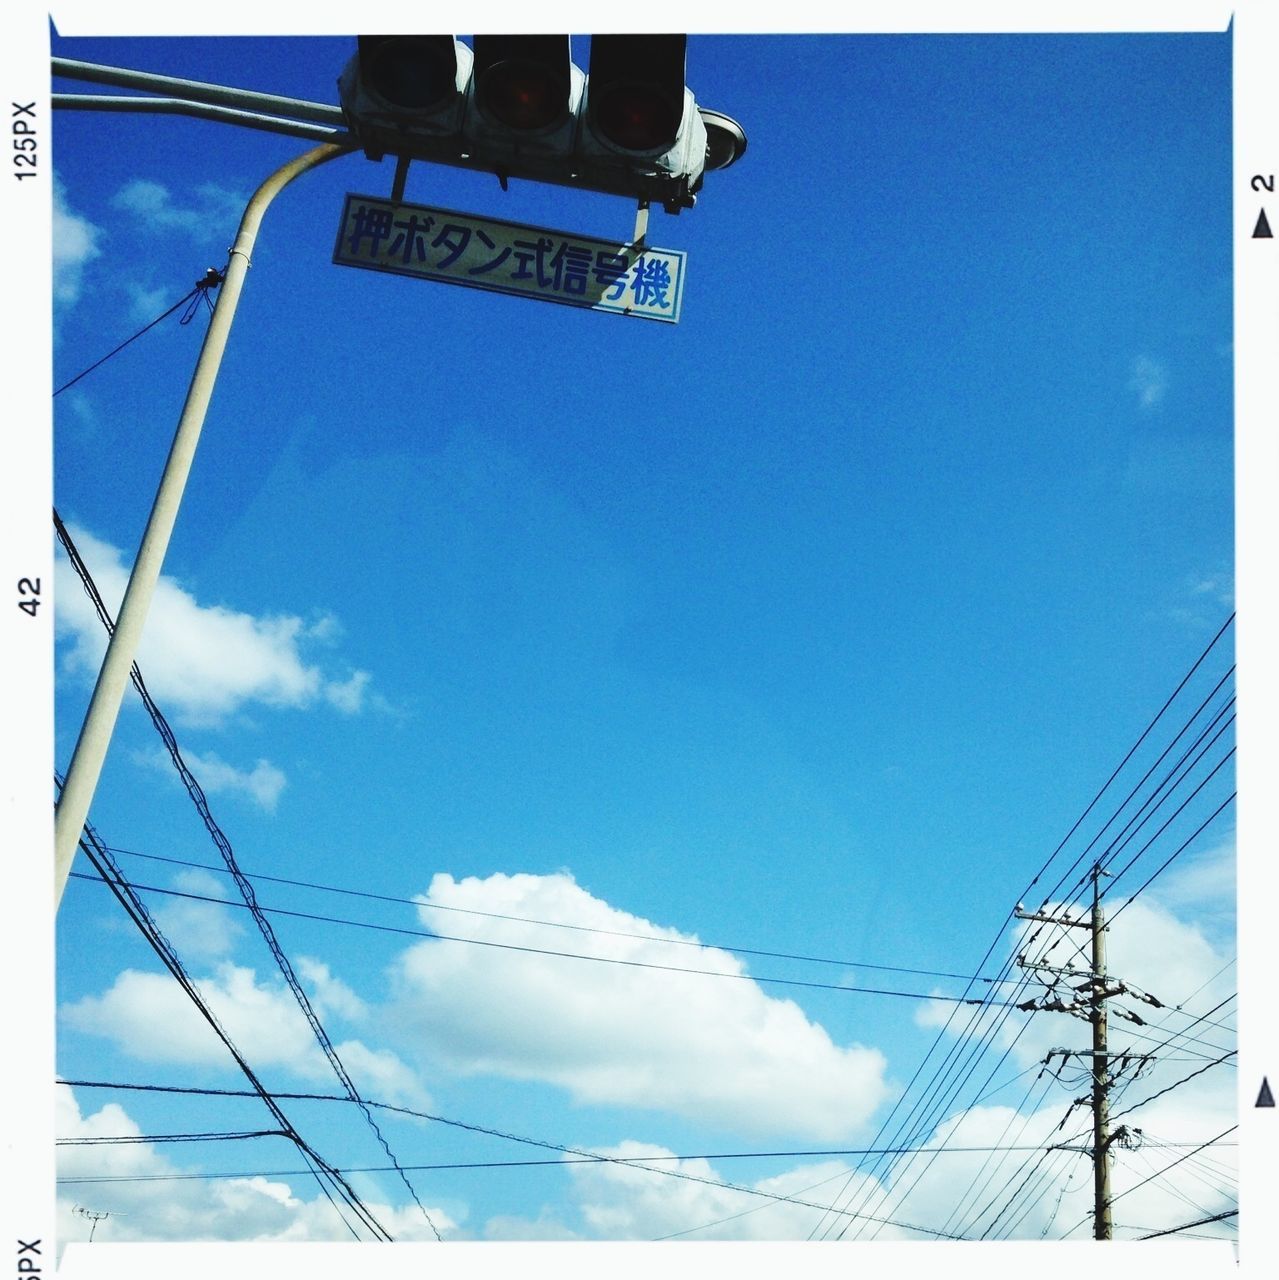 low angle view, power line, electricity, power supply, cable, electricity pylon, blue, sky, connection, fuel and power generation, power cable, technology, cloud - sky, cloud, pole, day, no people, outdoors, transfer print, vapor trail